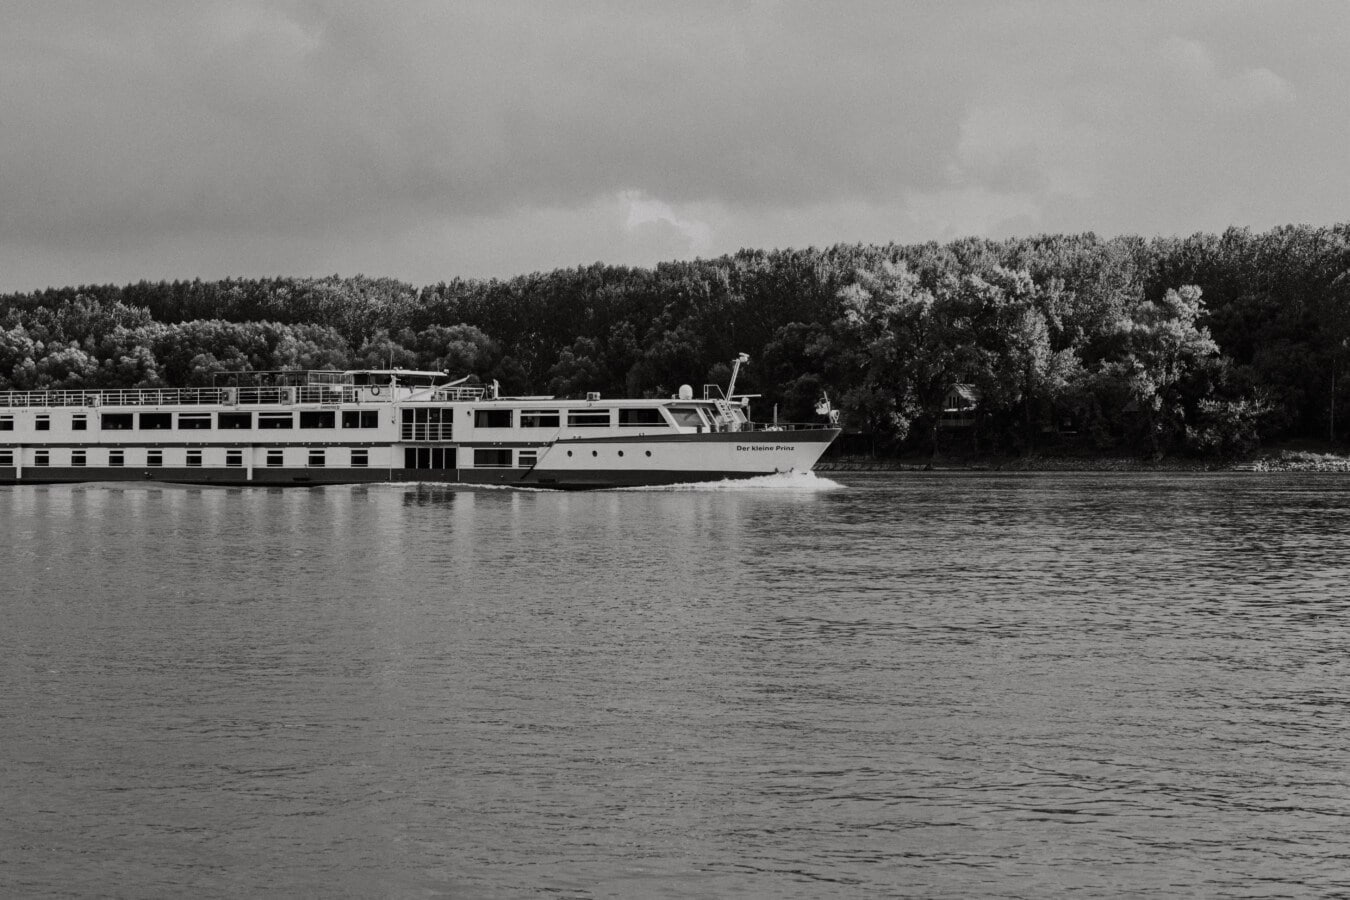 cruise ship, monochrome, black and white, ship, tourist attraction, travel, river, vehicle, water, shore